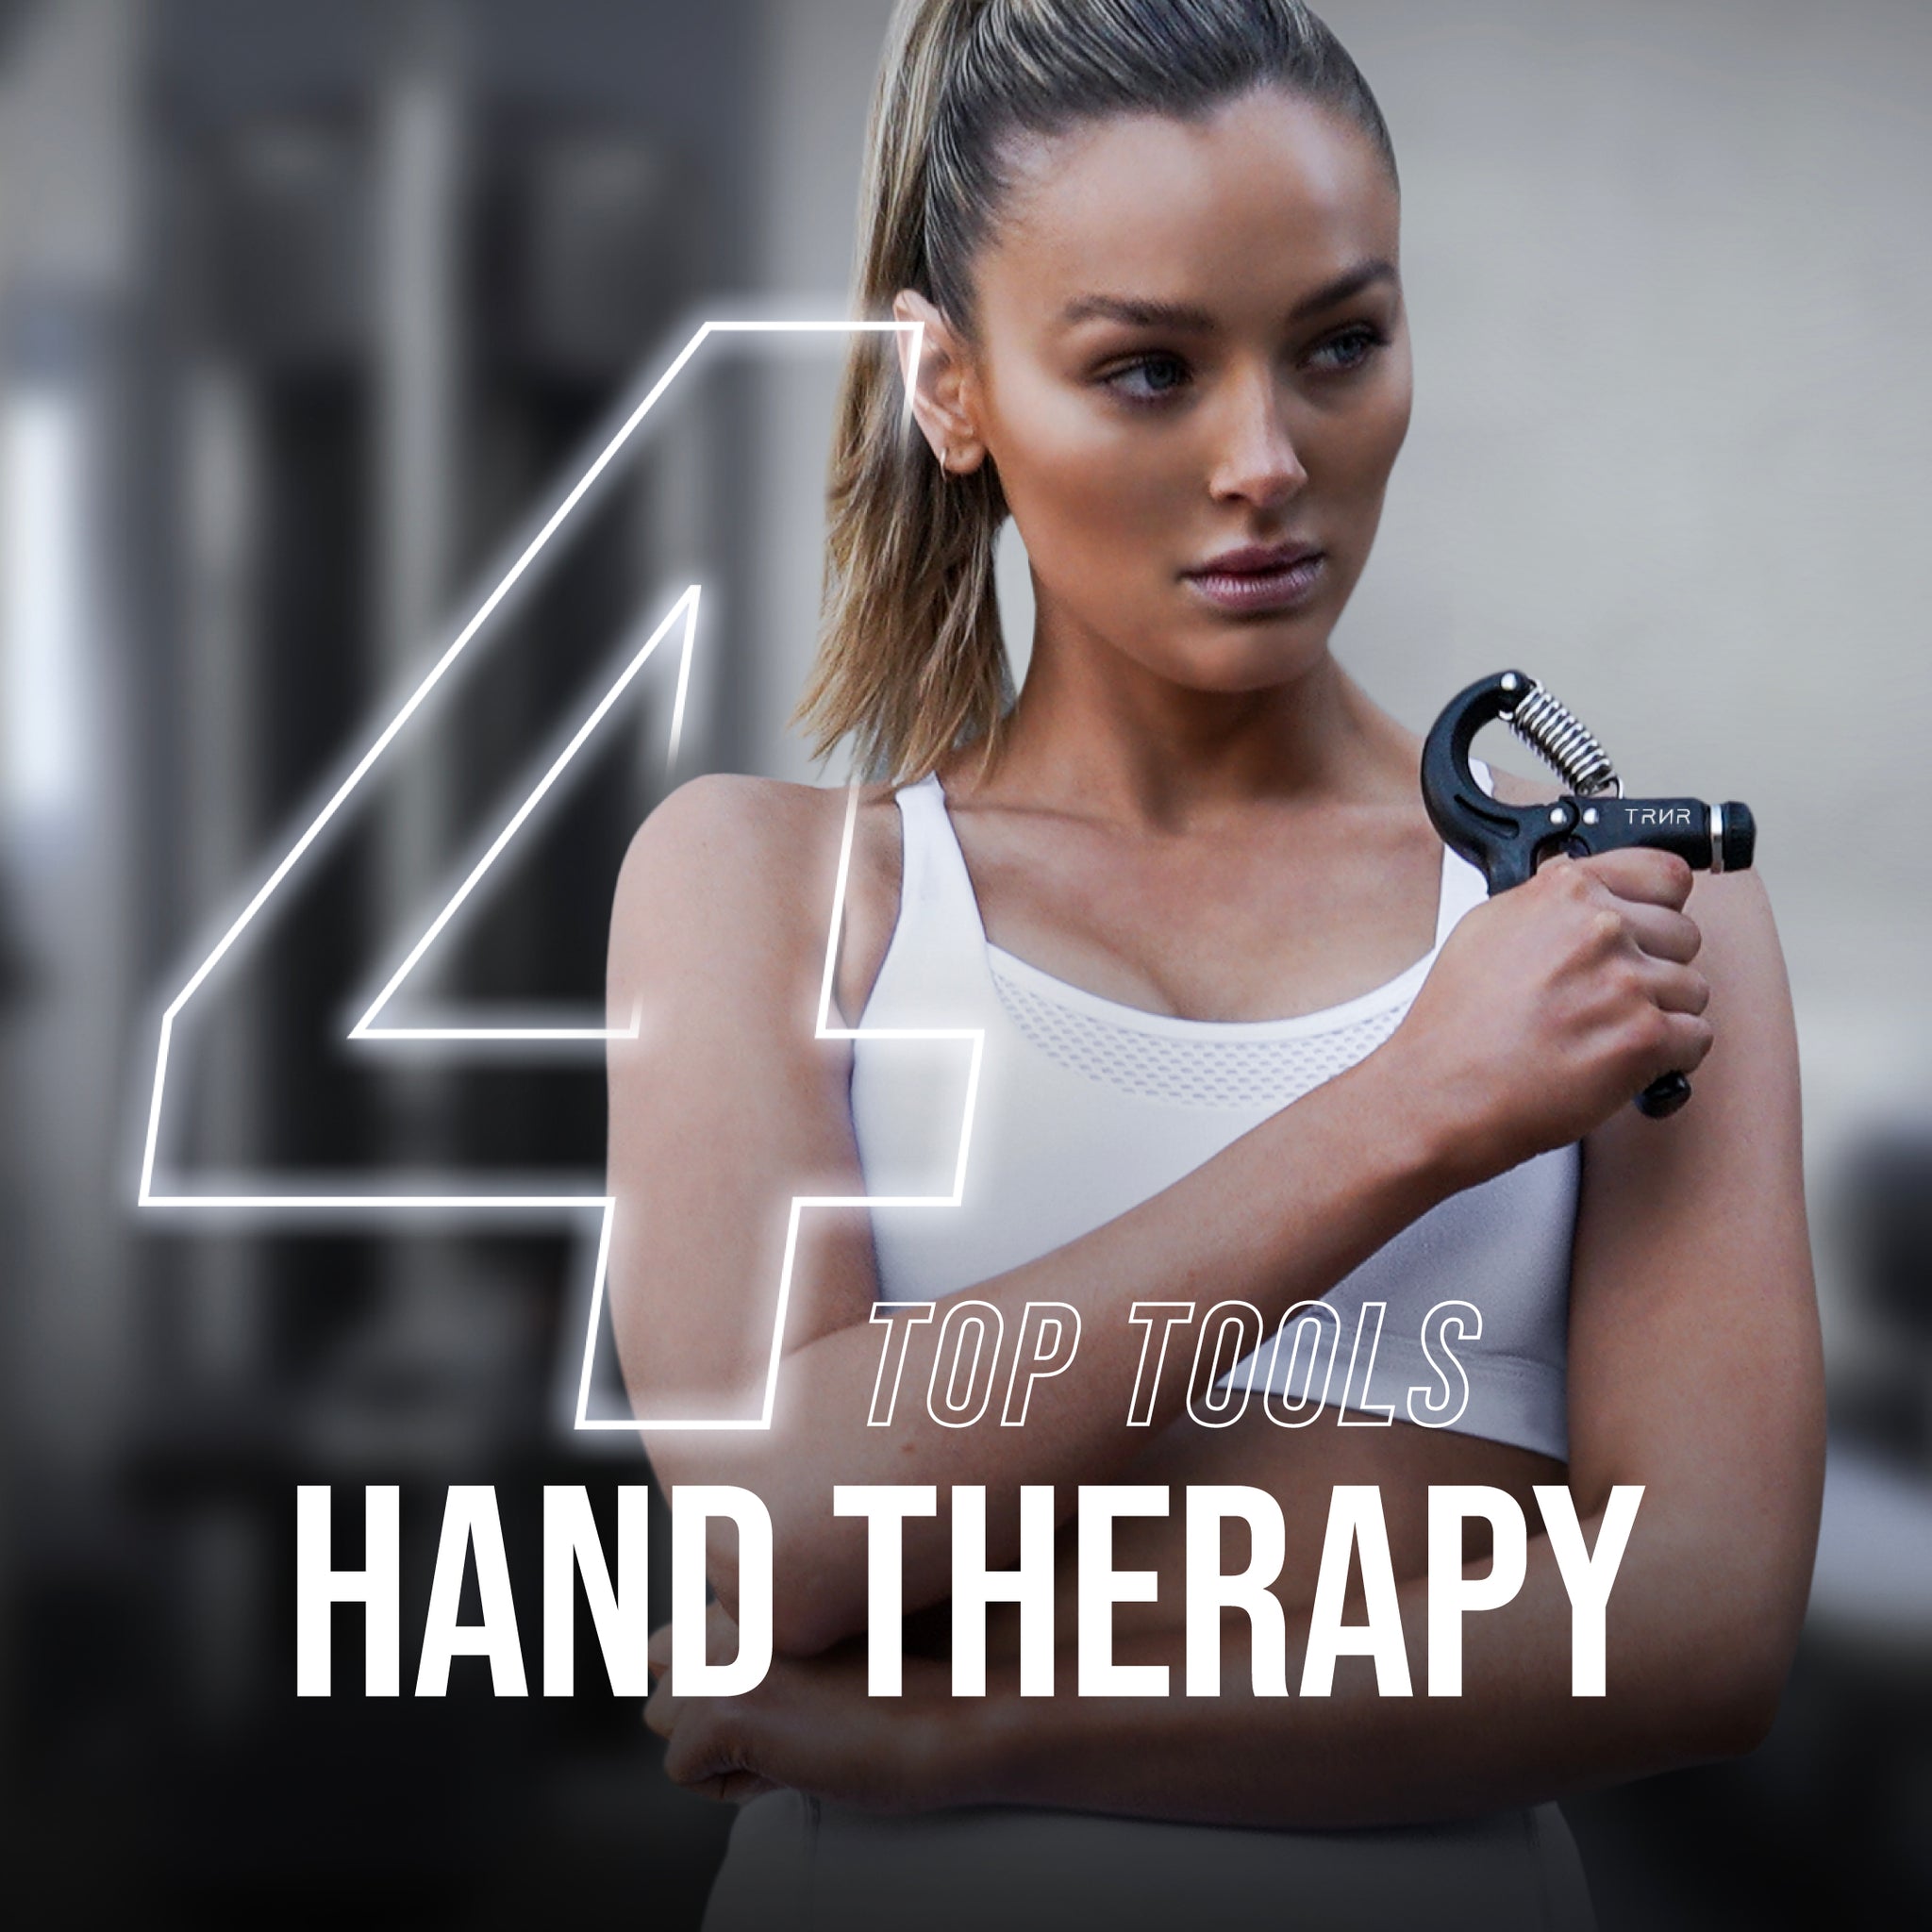 Top 4 Tools For Occupational And Physical Hand Therapy